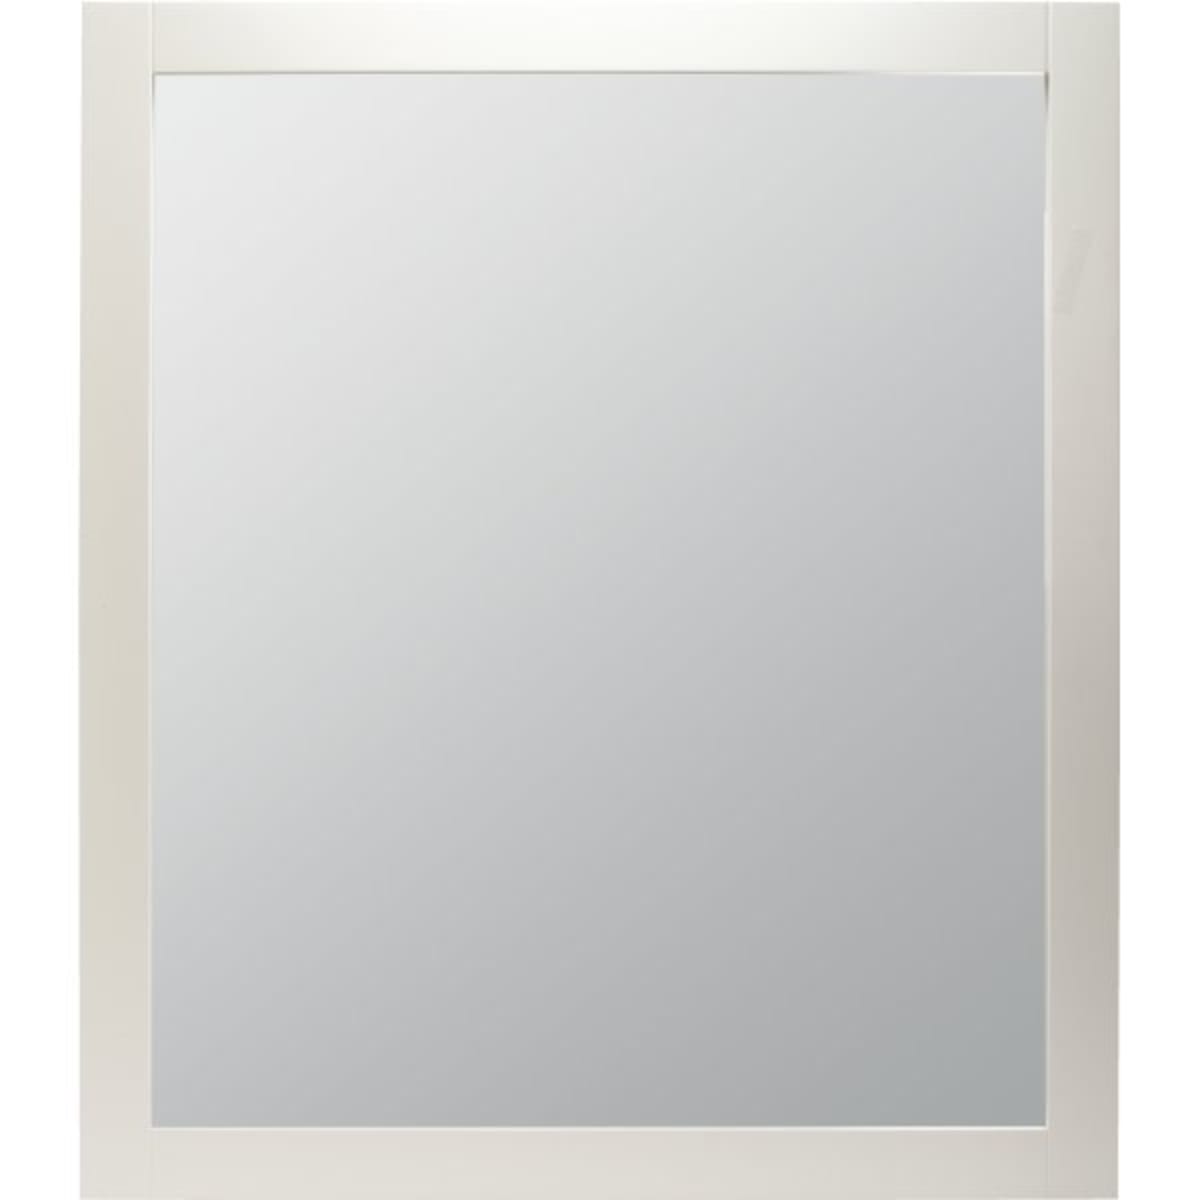 Gardner Glass Products 24-in W x 36-in H White MDF Modern/Contemporary Mirror Frame Kit Hardware Included | 15140